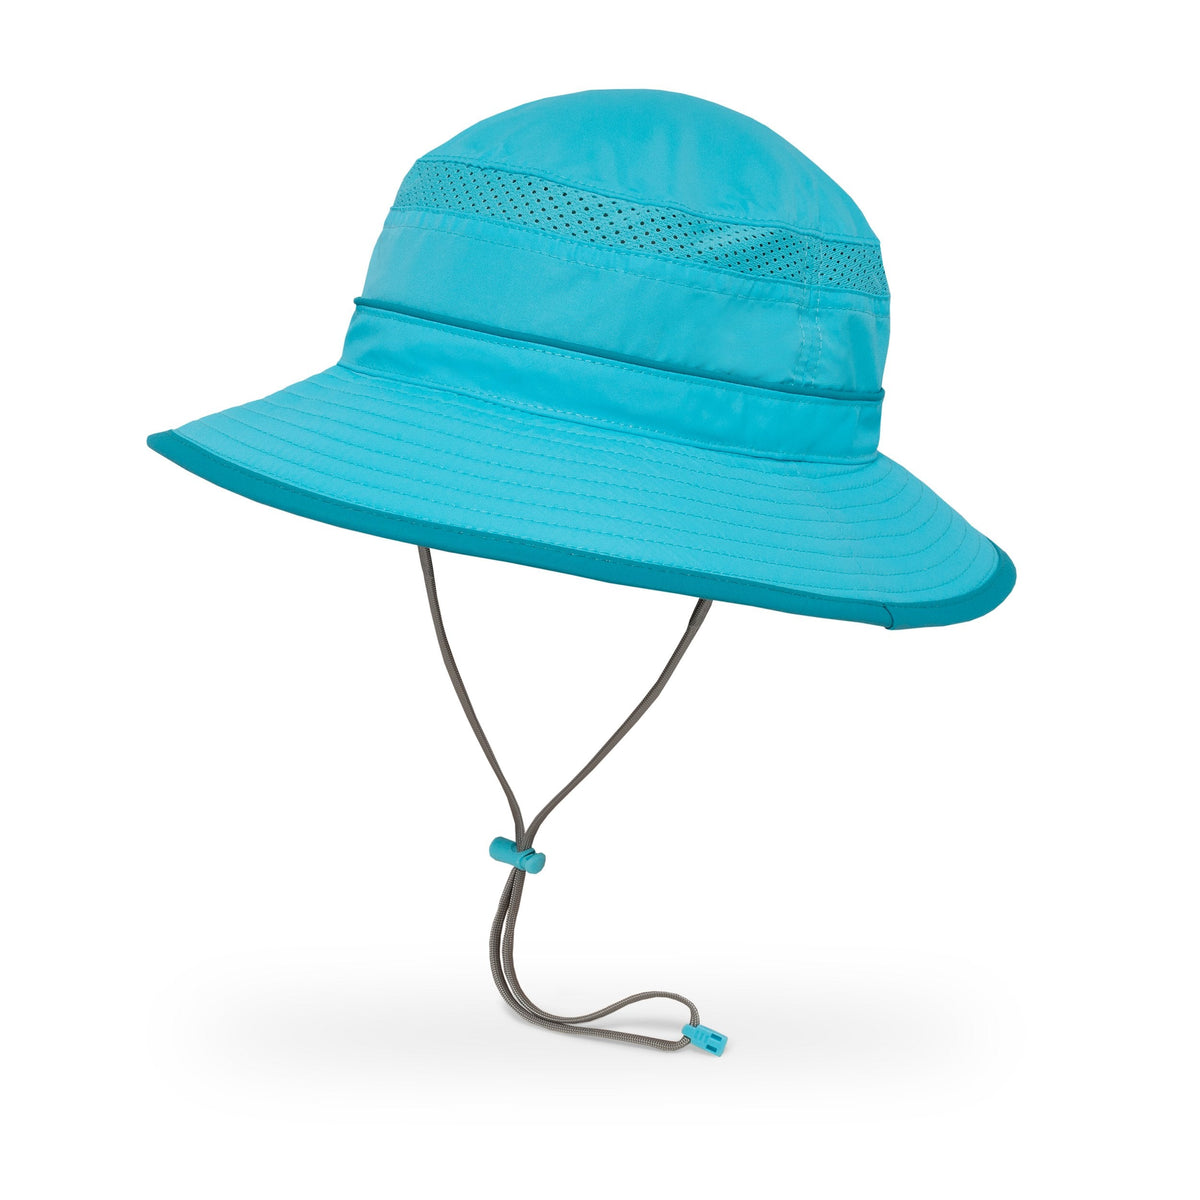 Sunday Afternoons Fun Bucket Hat - Toddlers'/Kids' Blue L